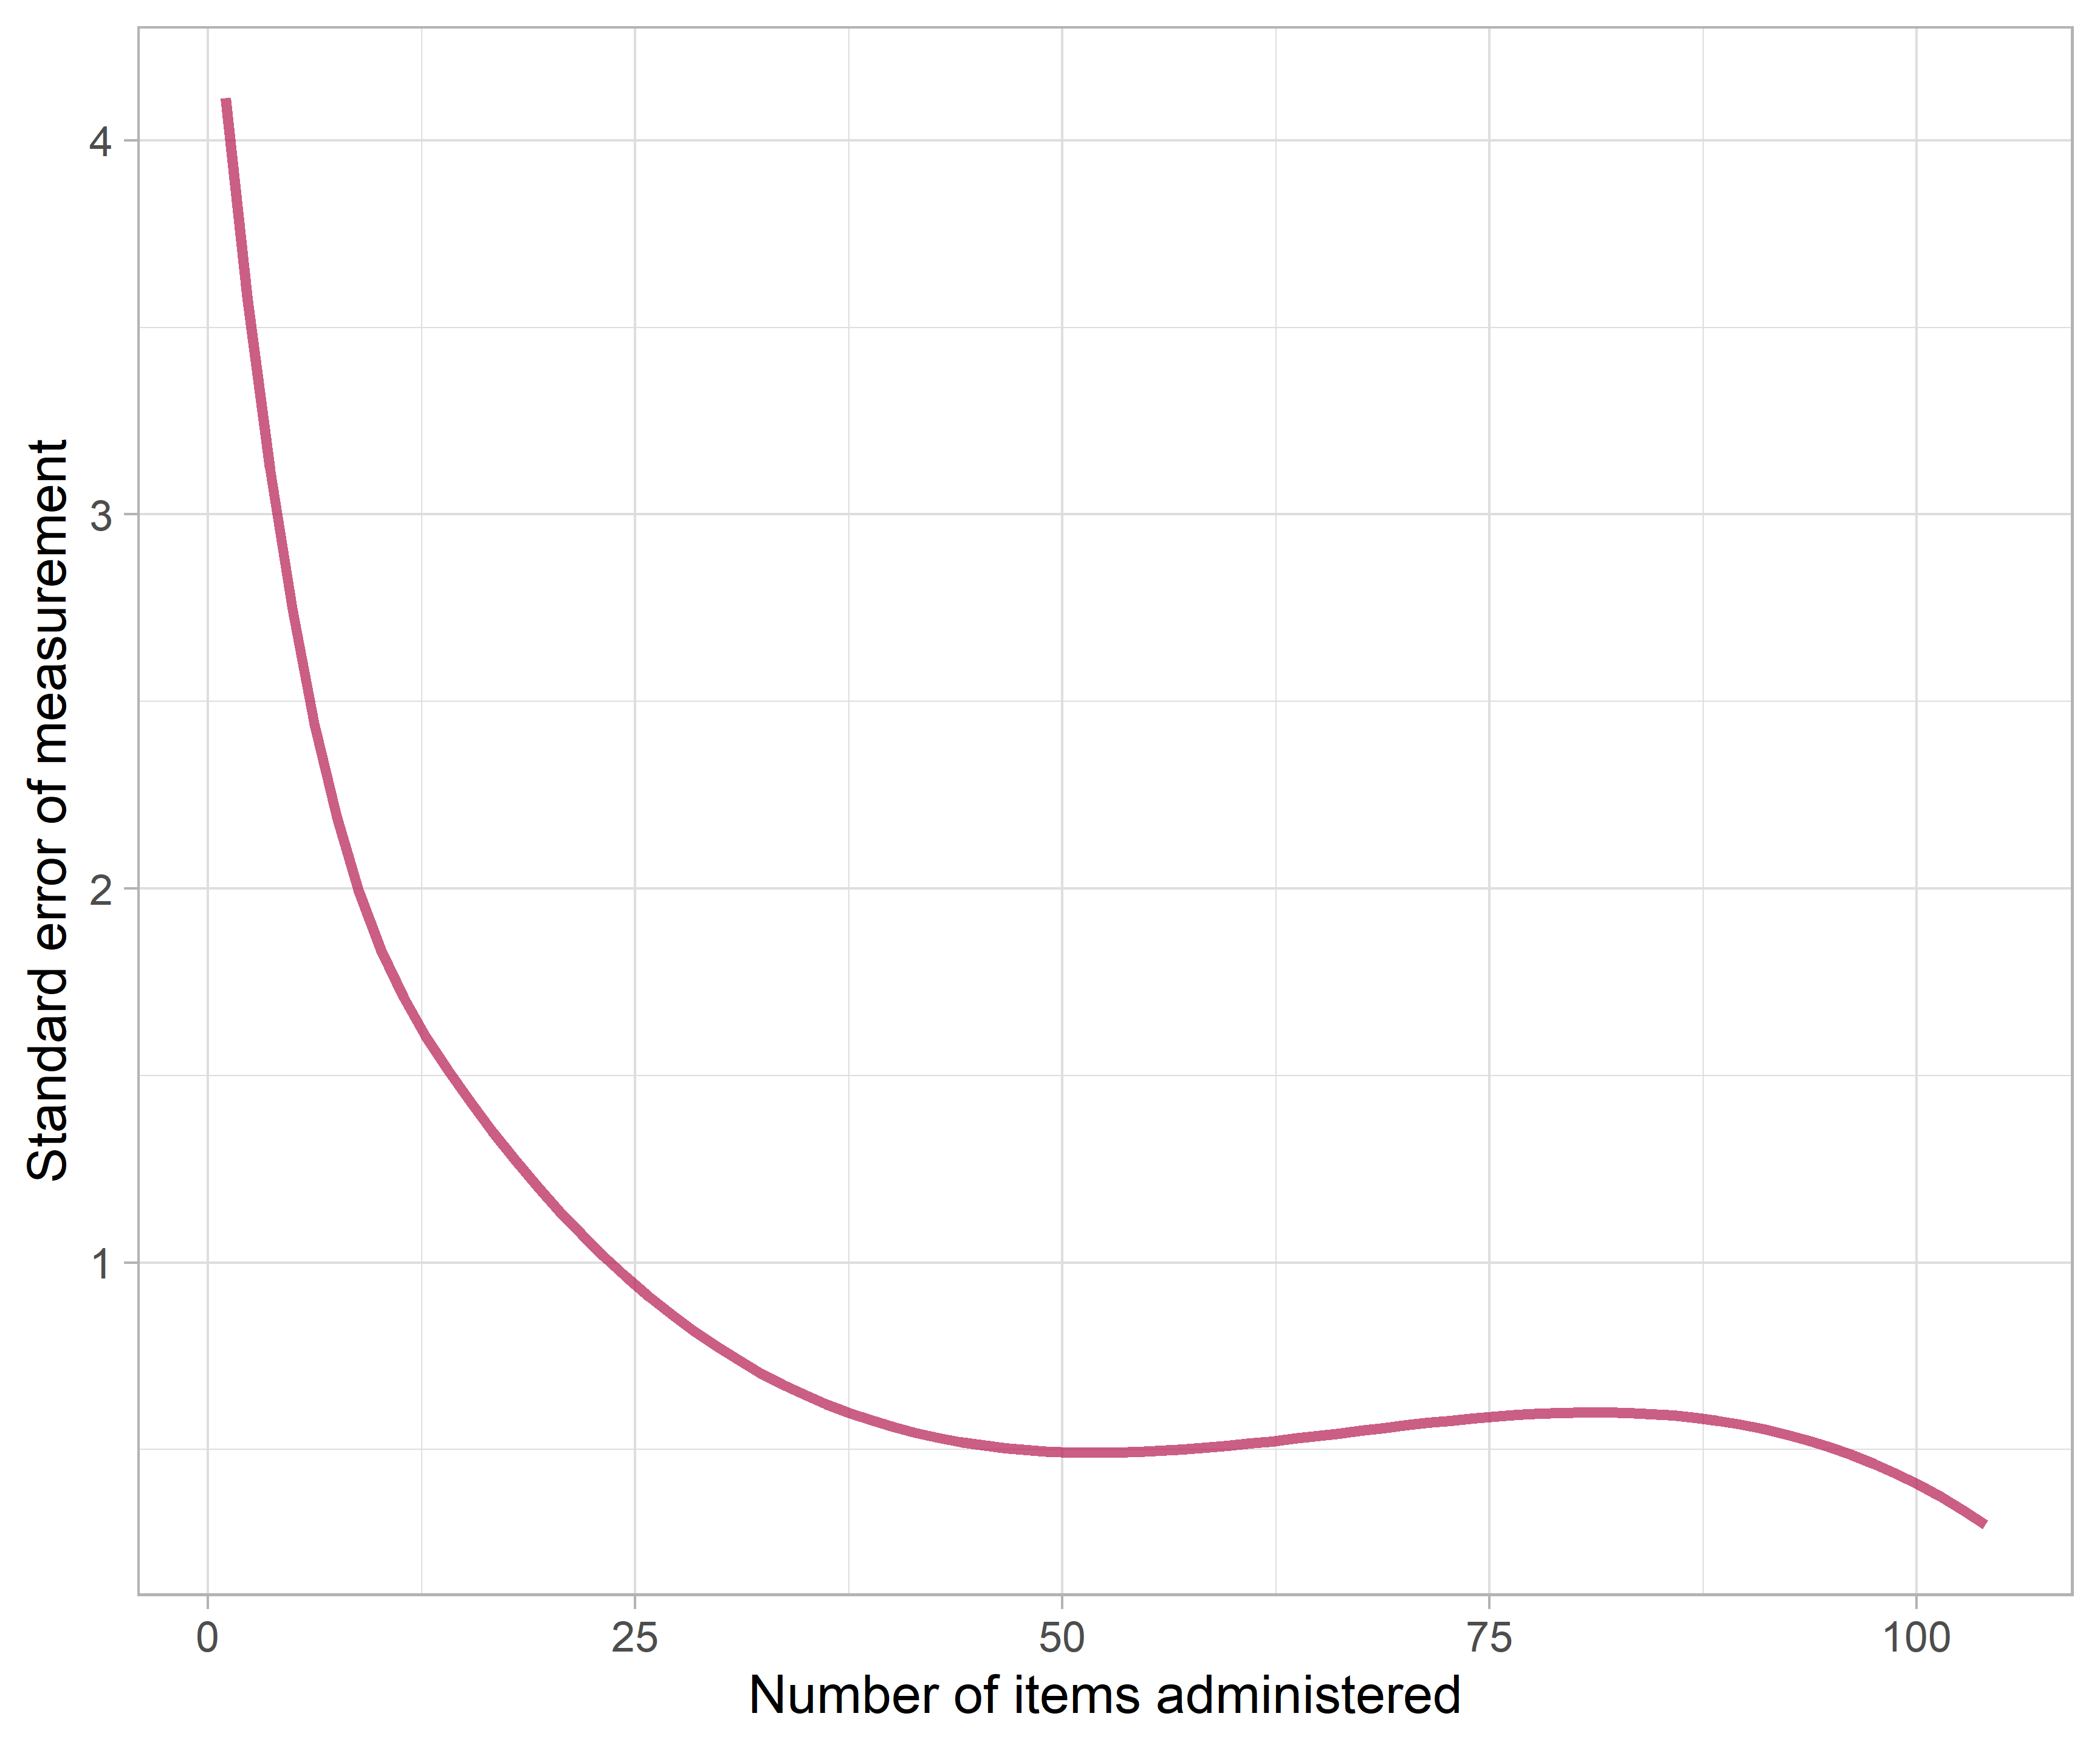 Standard error of measurement (sem) as a function of the number of items.